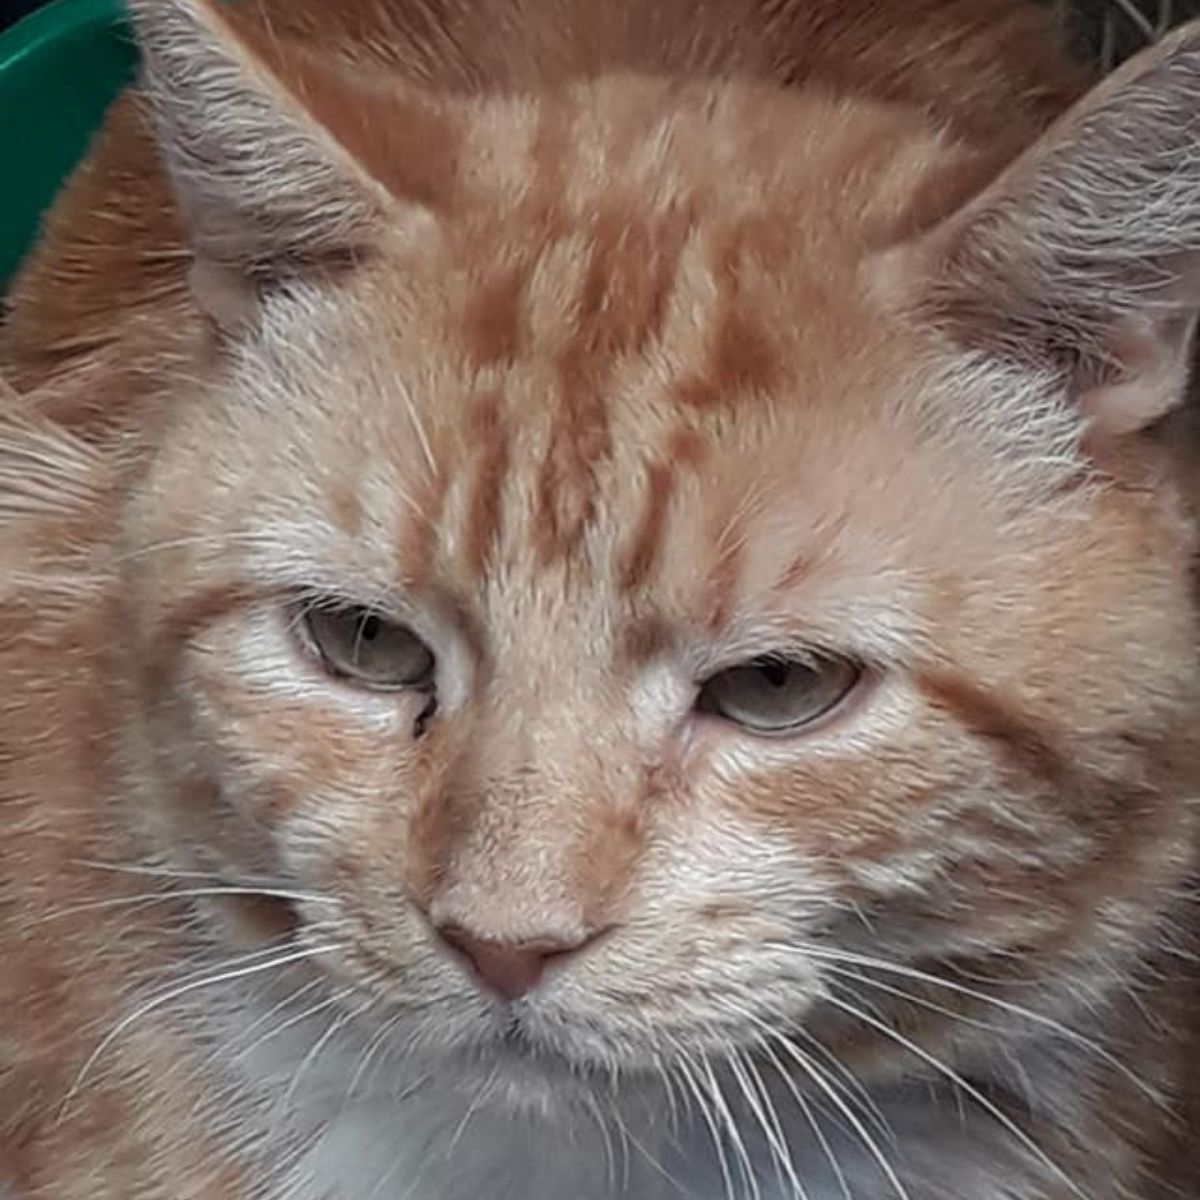 close-up photo of the ginger cat